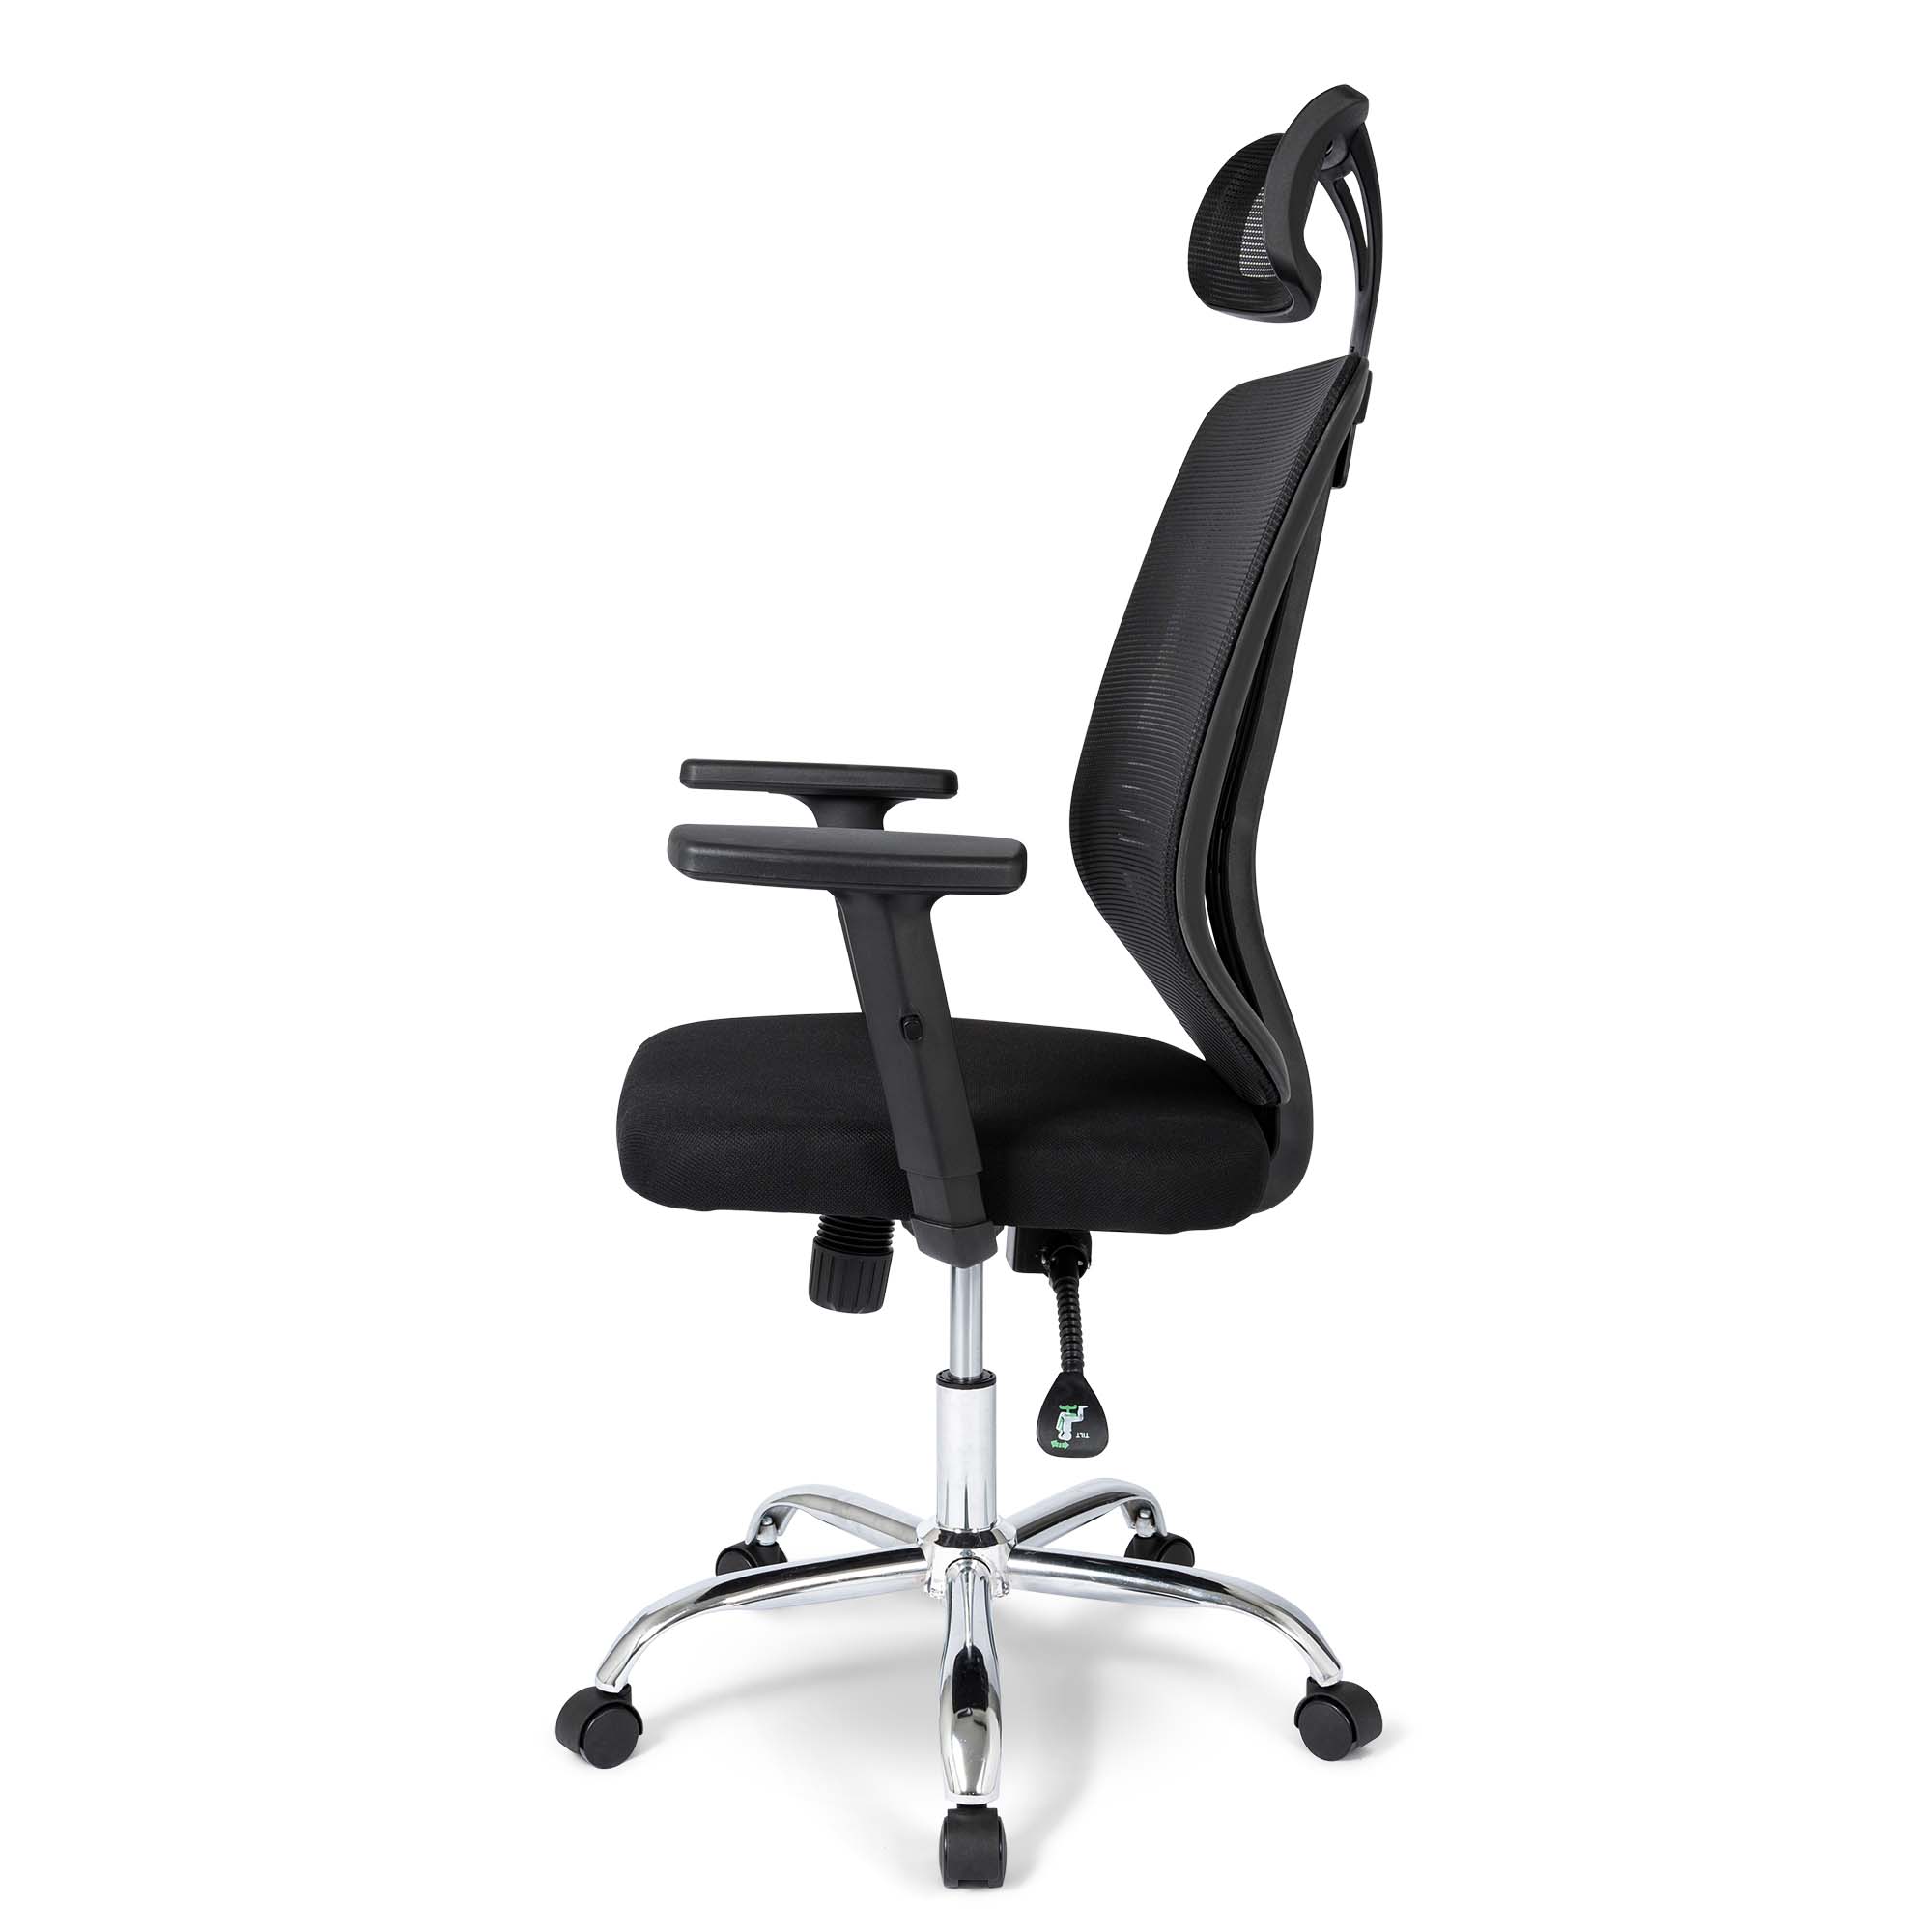 Ergodu Office Chair with Adjustable Armrests side view